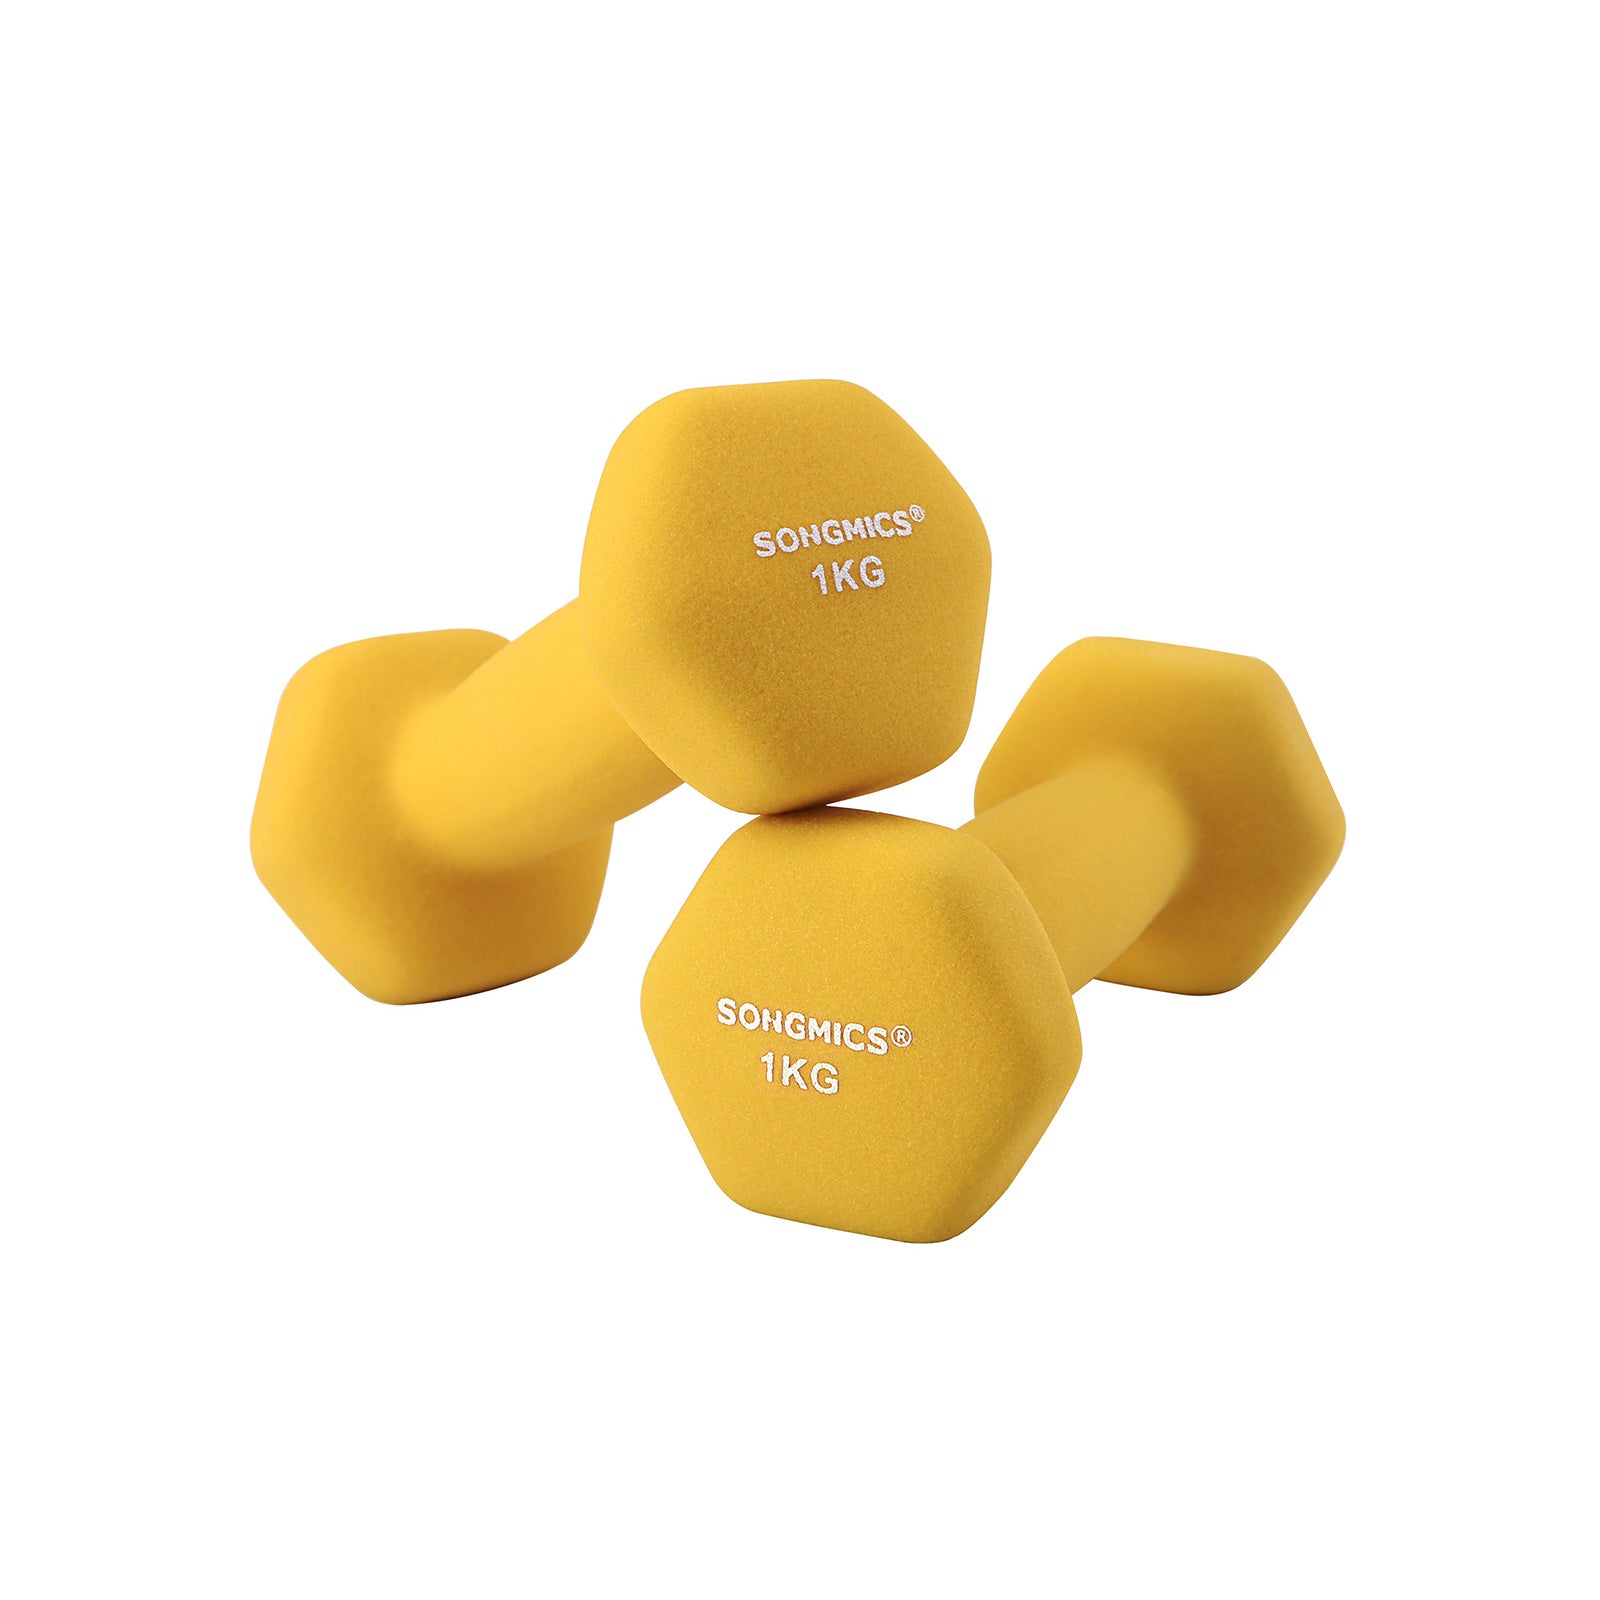 Image of Songmics - Set of 2 Dumbbells Weights Vinyl Coating, All-purpose Home Gym Fitness Waterproof and Non-Slip with Matte Finish, Yellow 2 x 1 kg SYL62YL